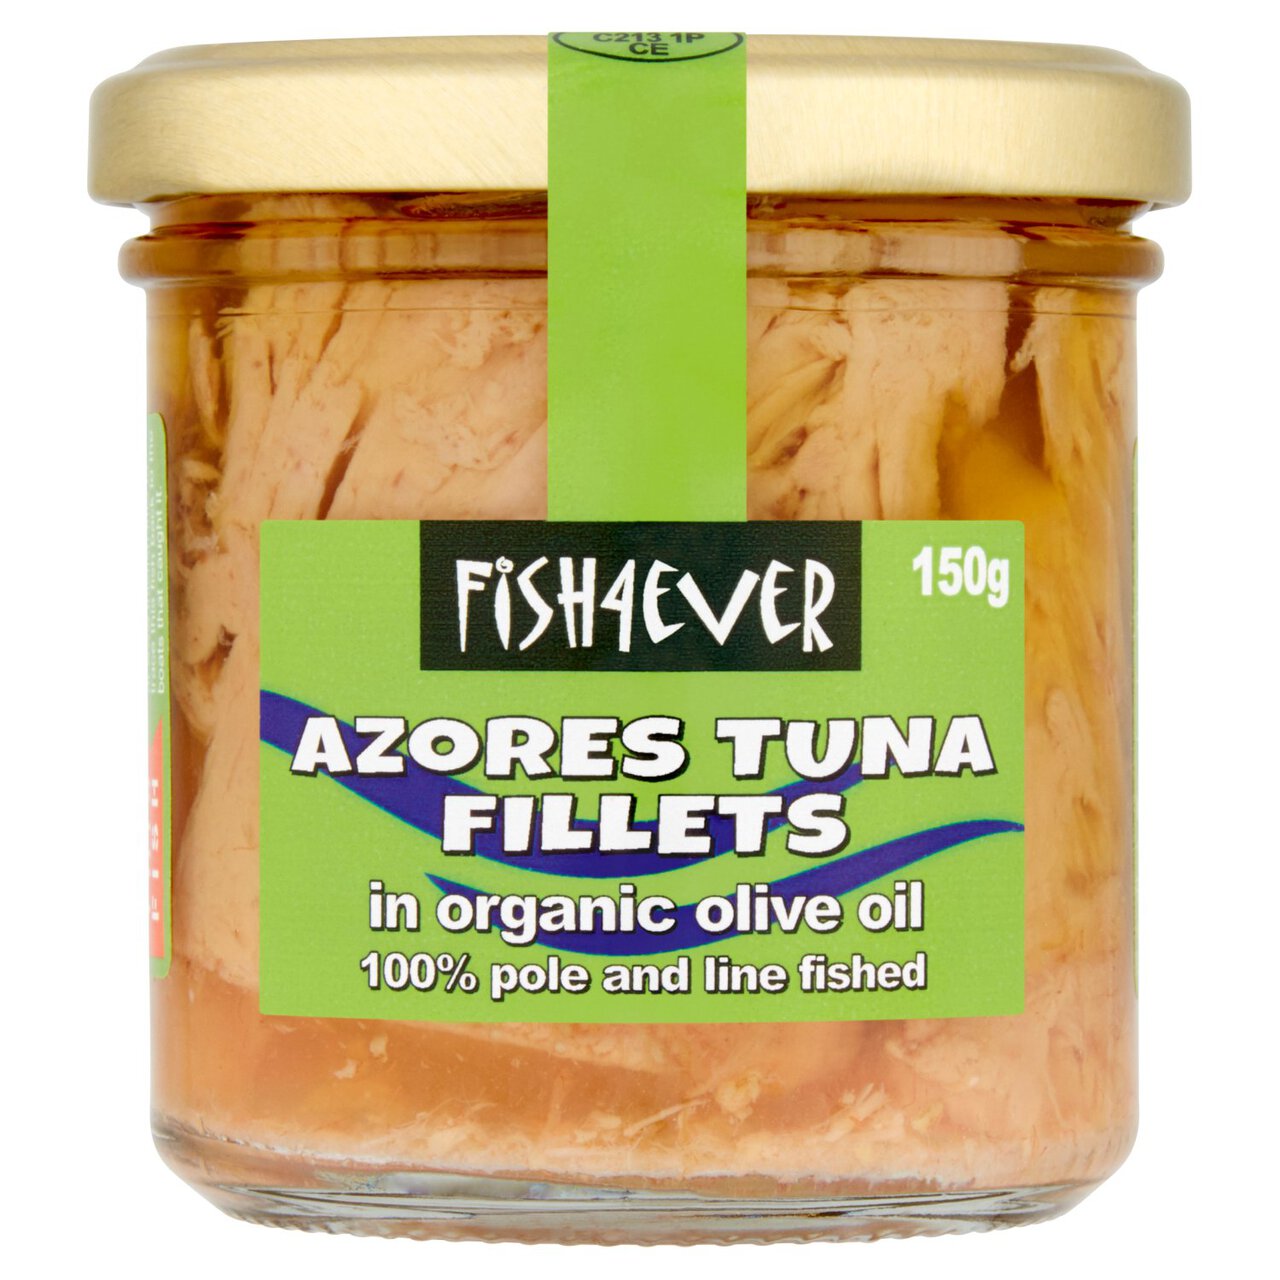 Fish 4 Ever Azores Tuna Fillets in Organic Olive Oil 150g